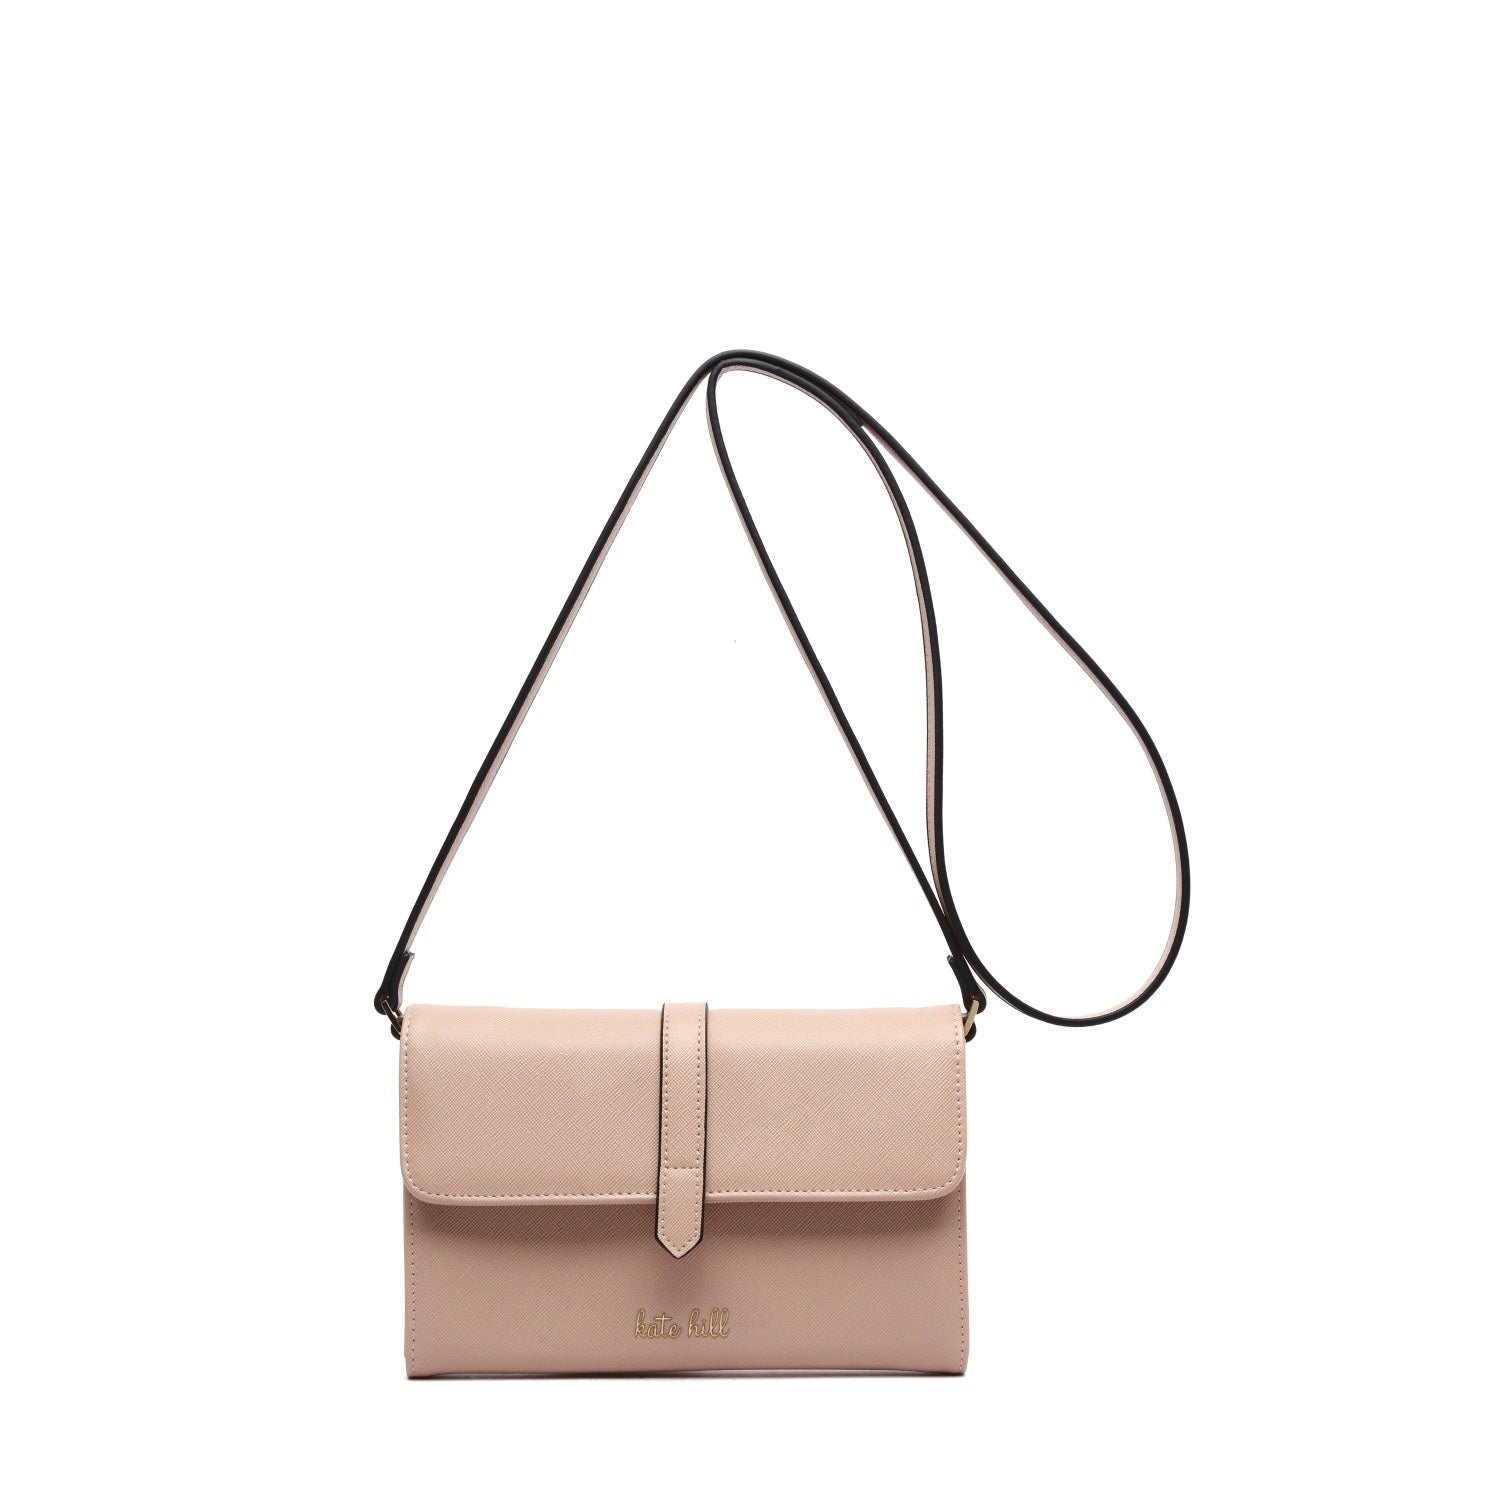 Kate Hill - Everly Crossbody KH-22003 - Nude